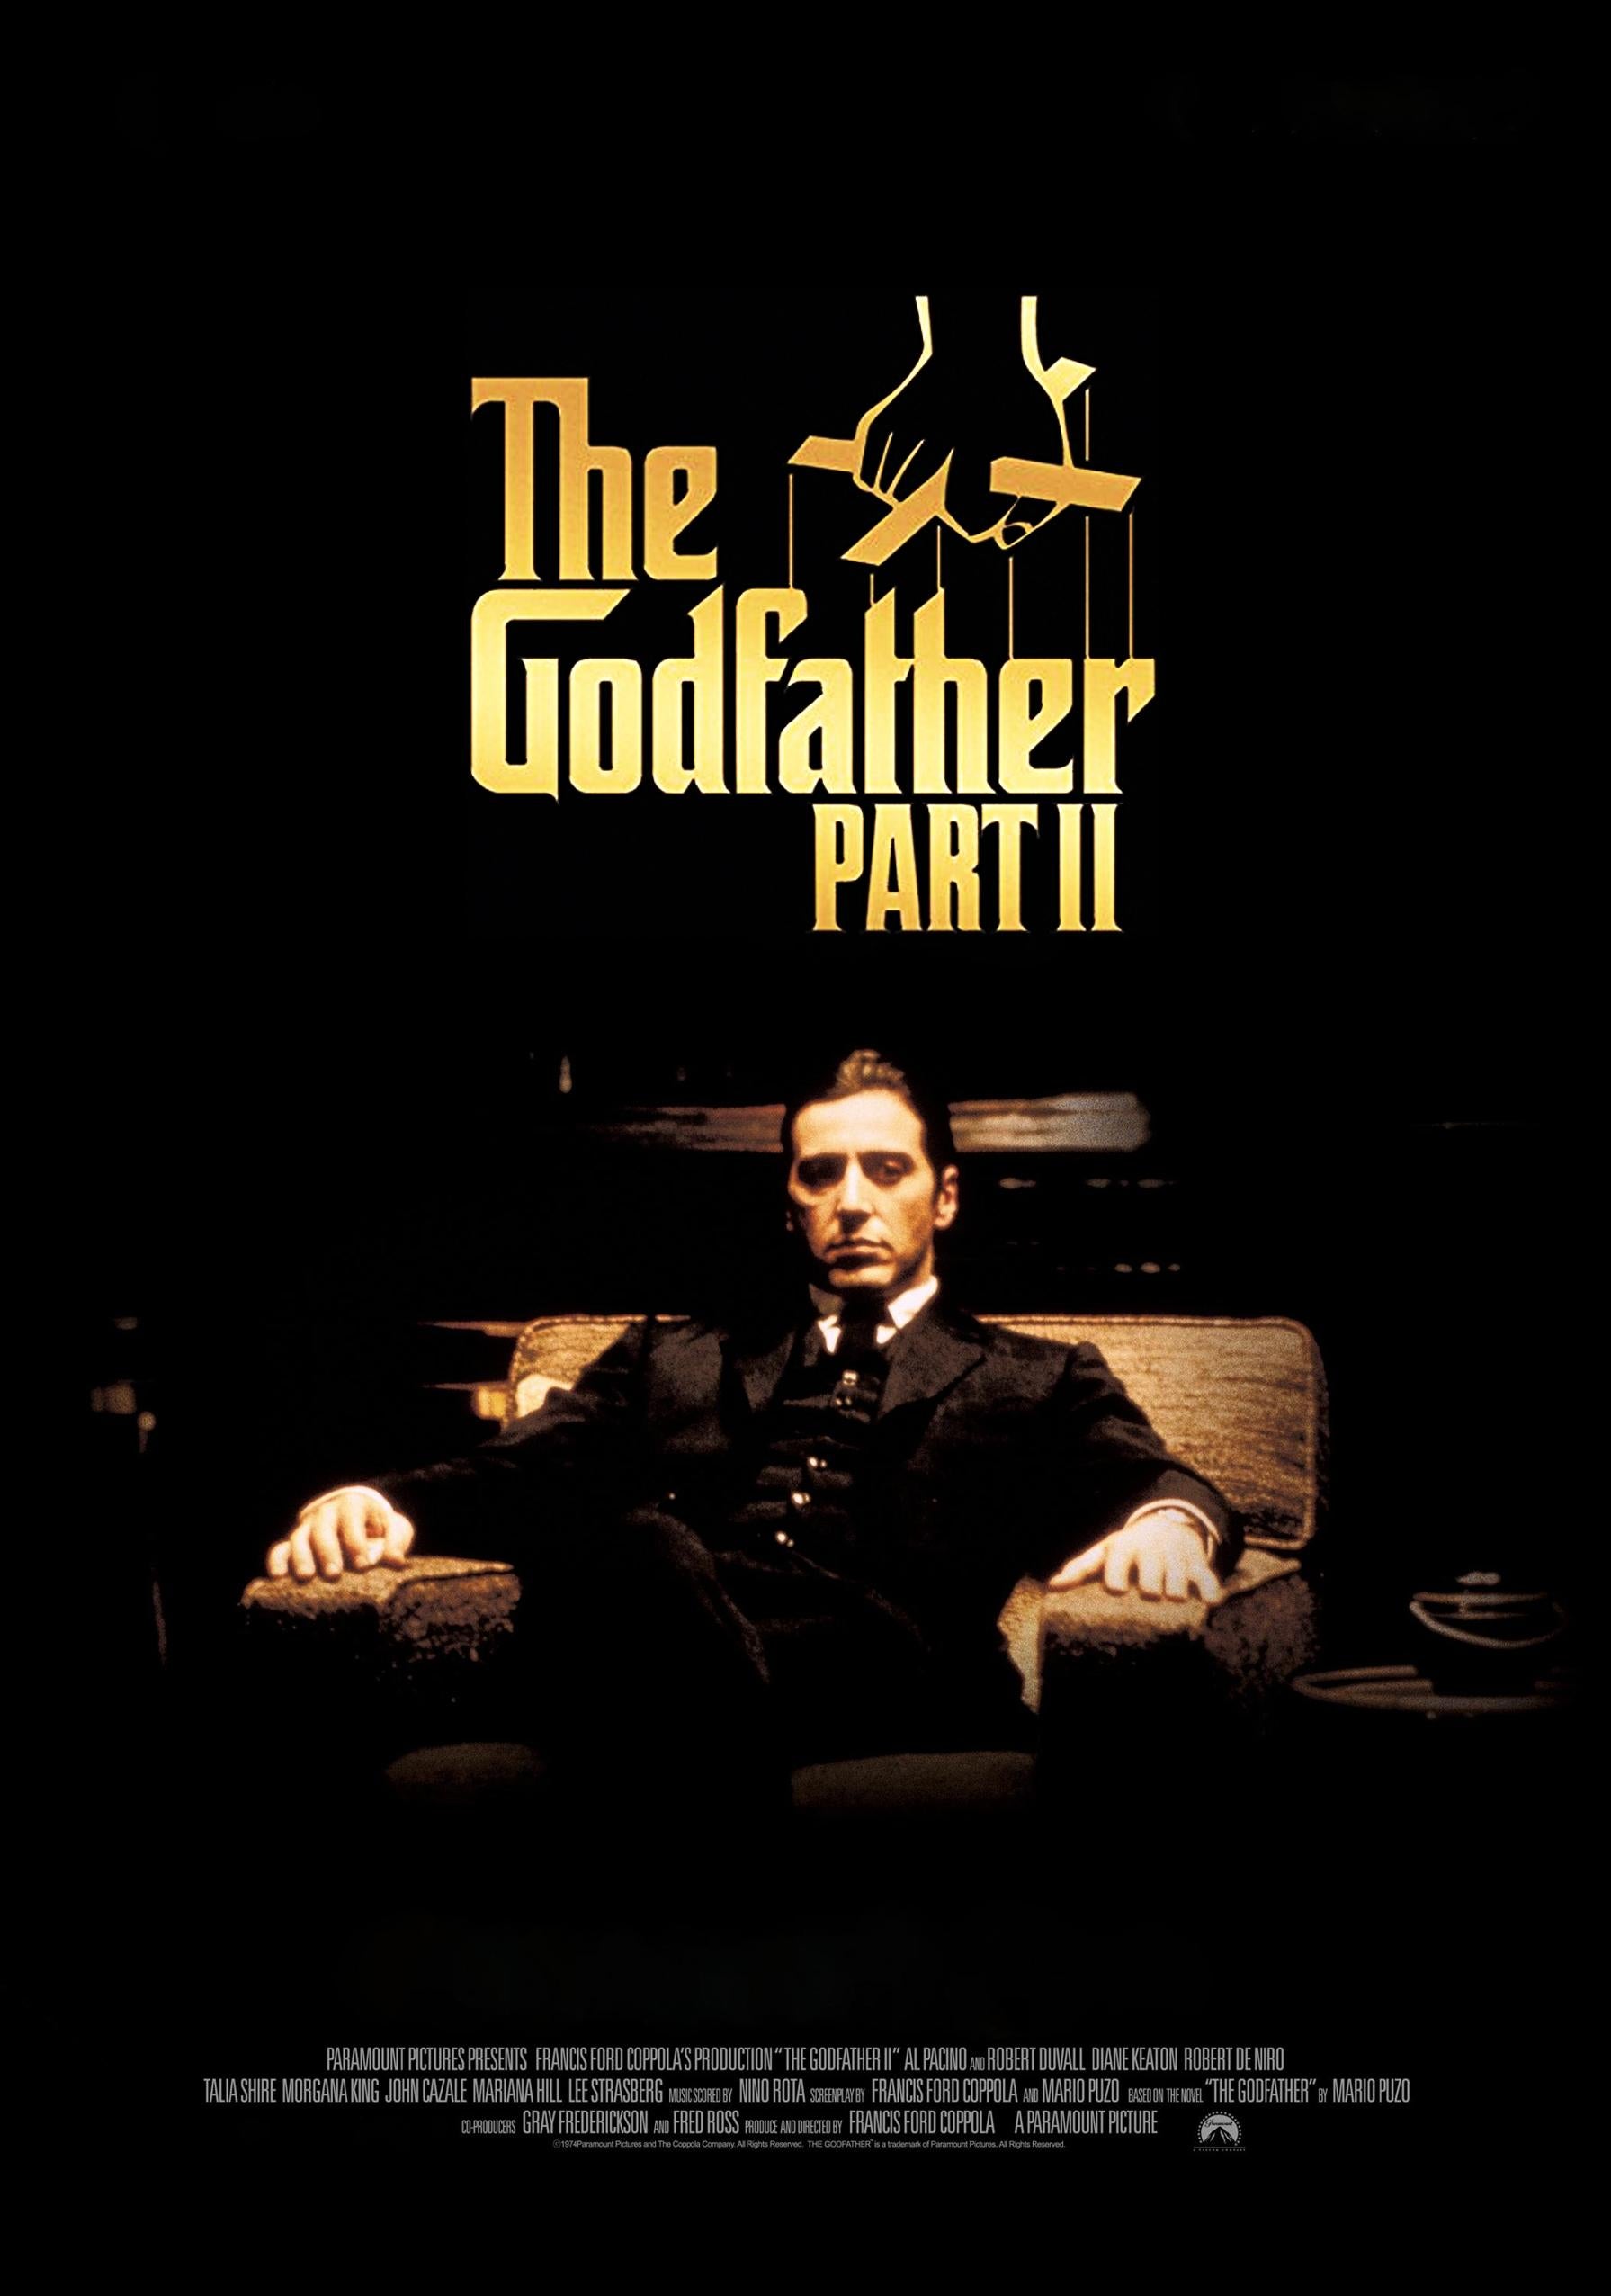 The Godfather Part II with Al Pacino as Michael Corleone sitting on a chair